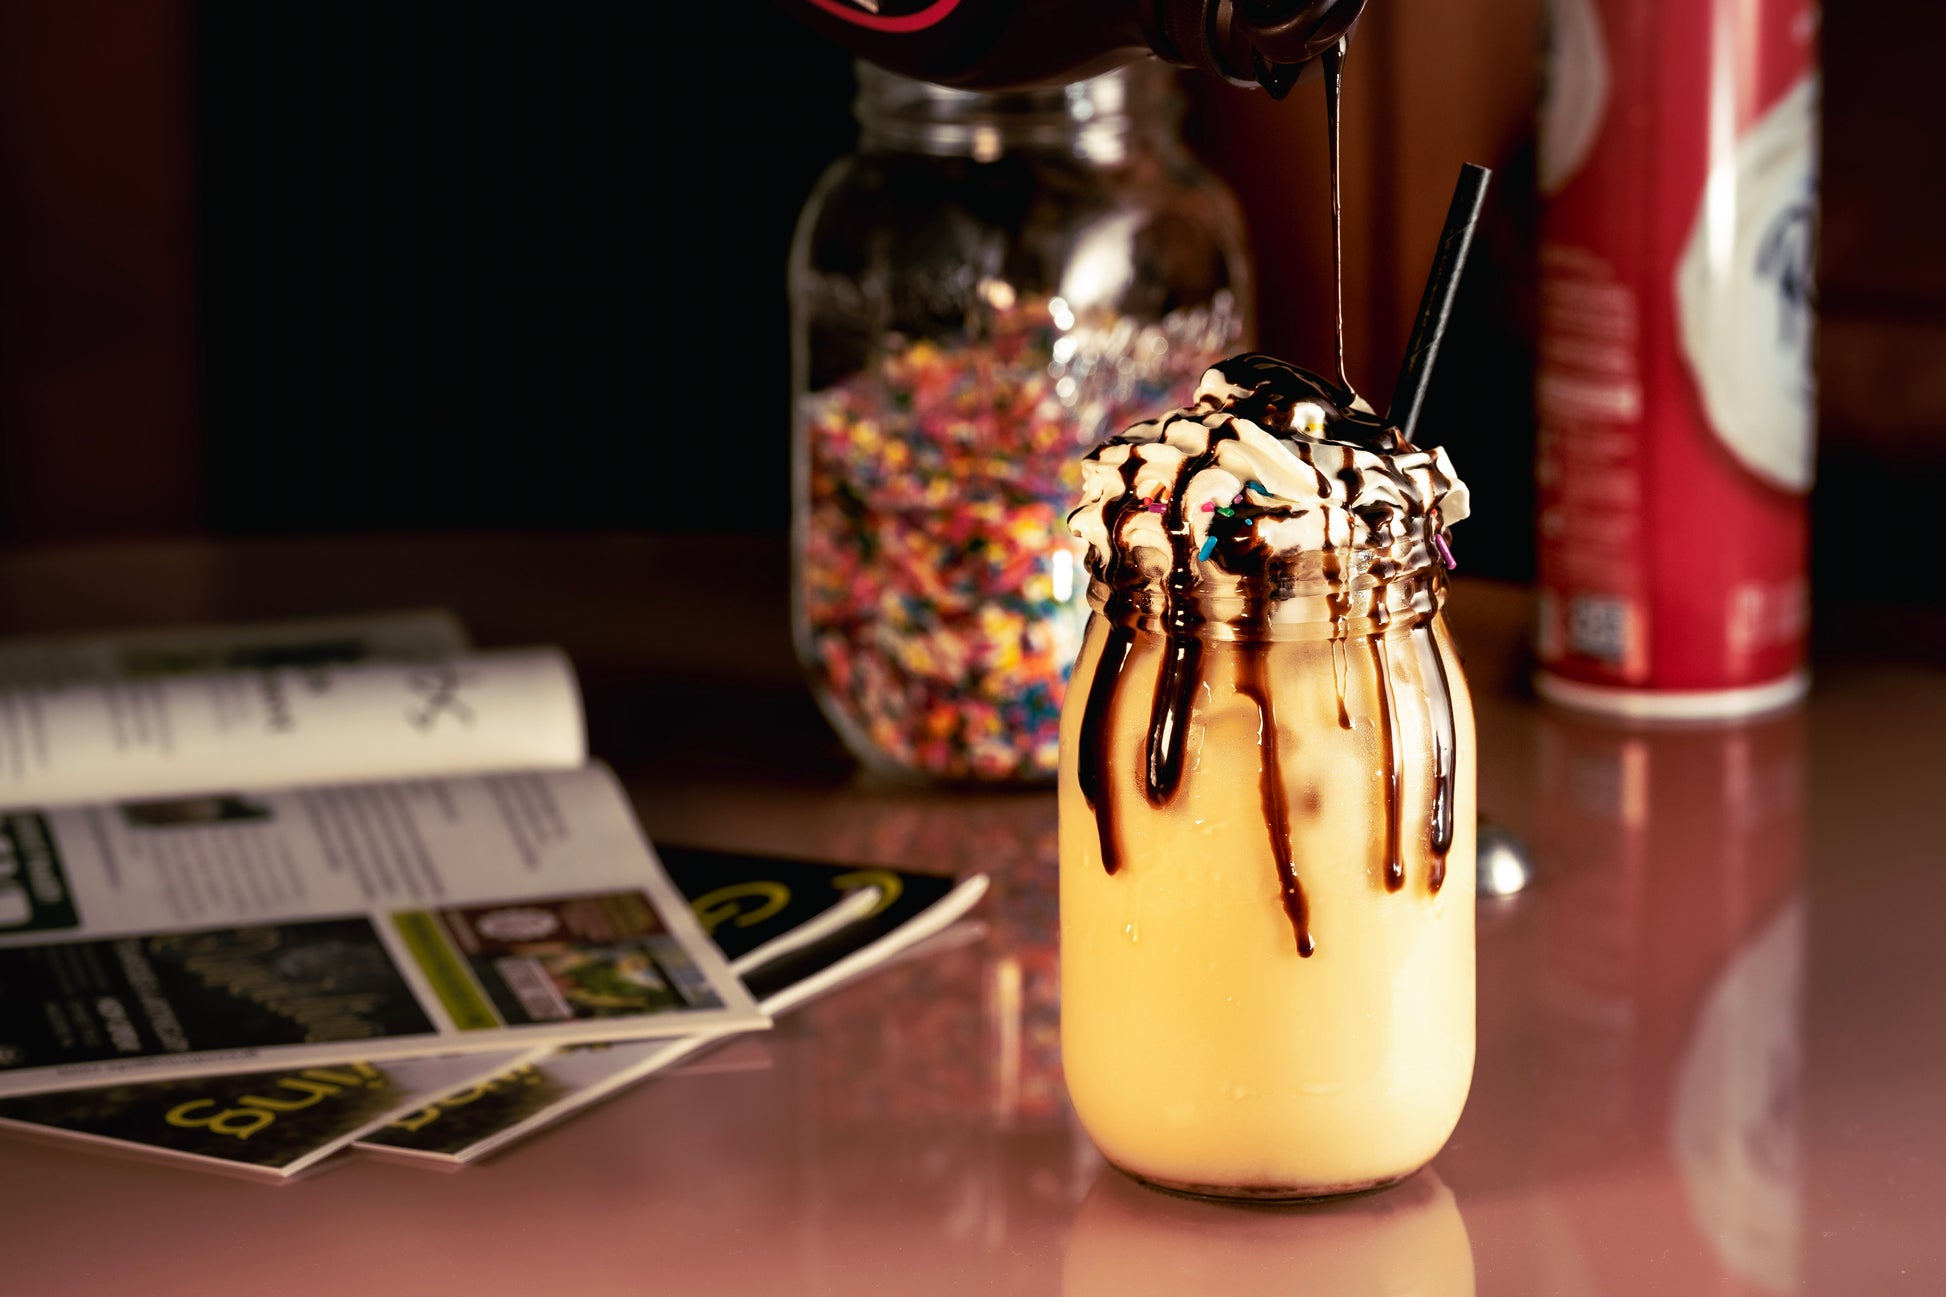 banana split latte with chocolate sauce being poured on top